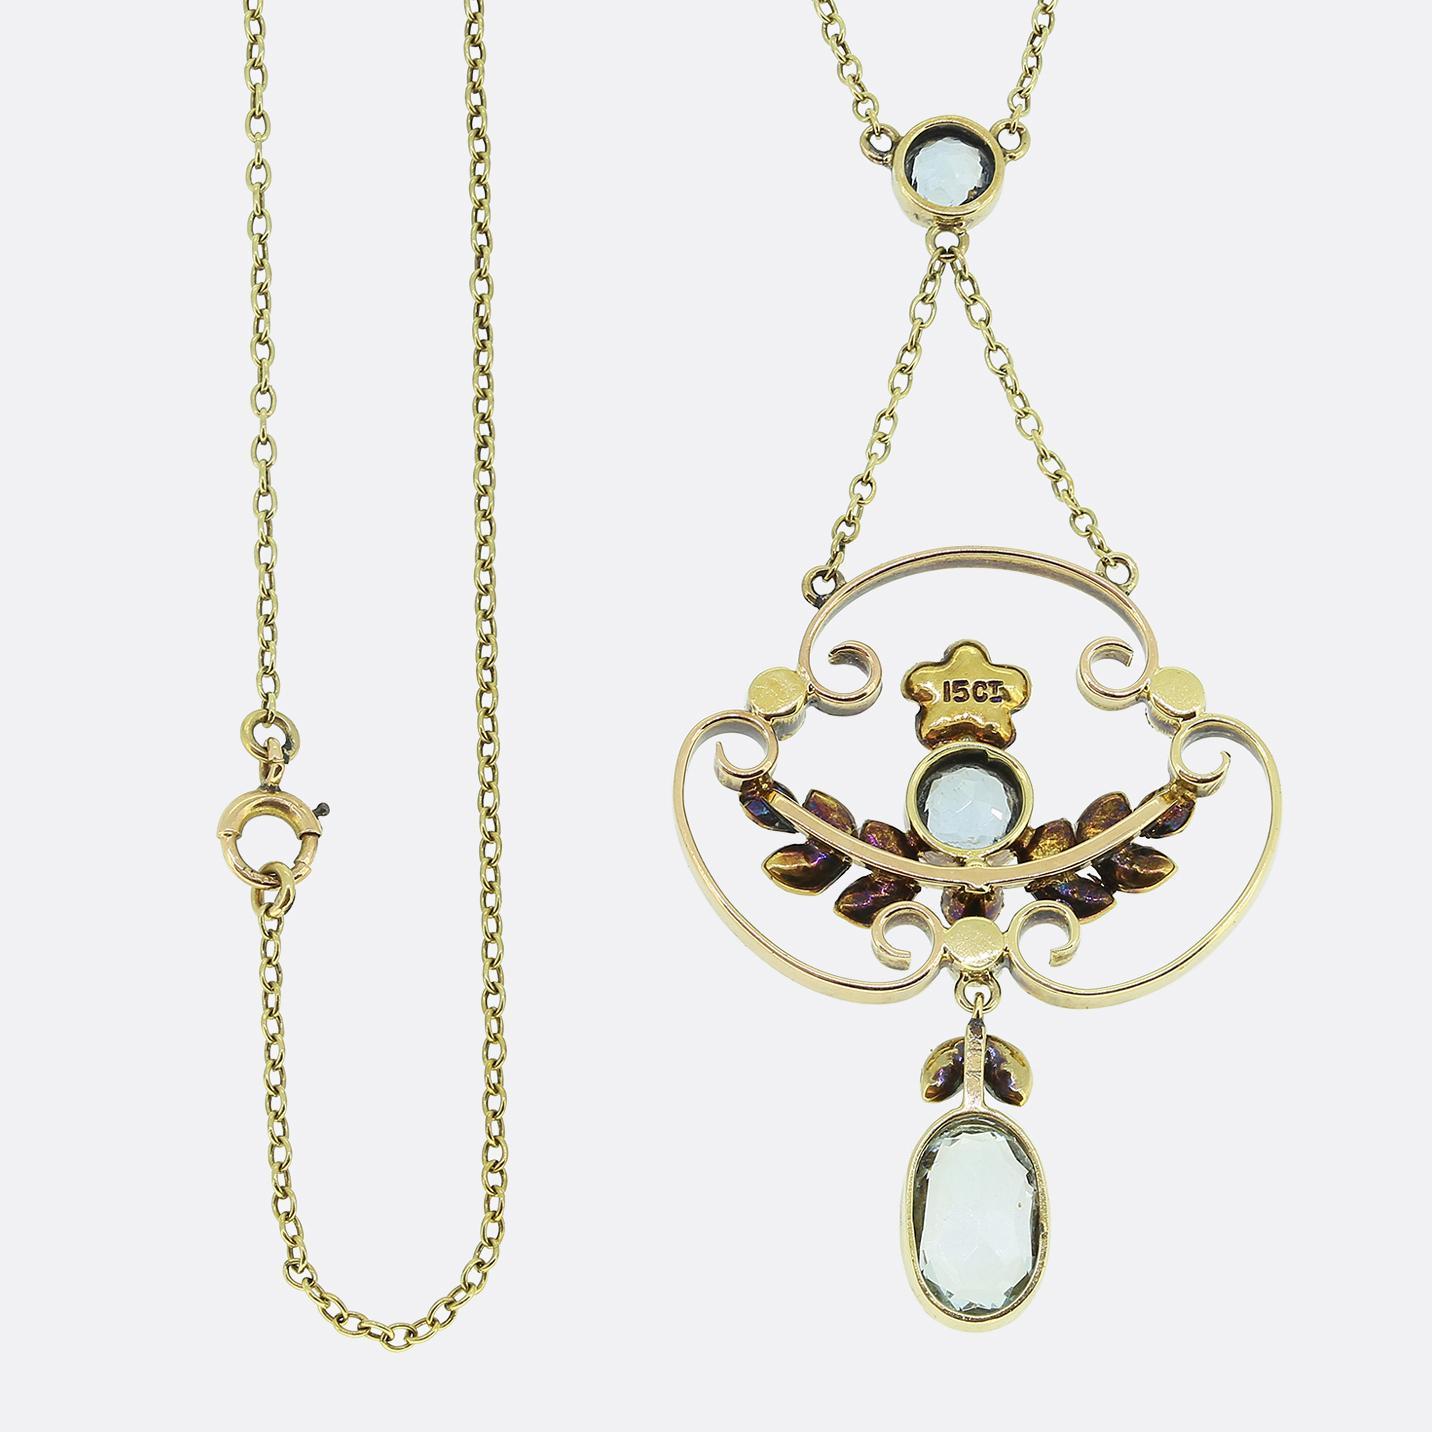 Round Cut Victorian Aquamarine and Pearl Lavalier Necklace